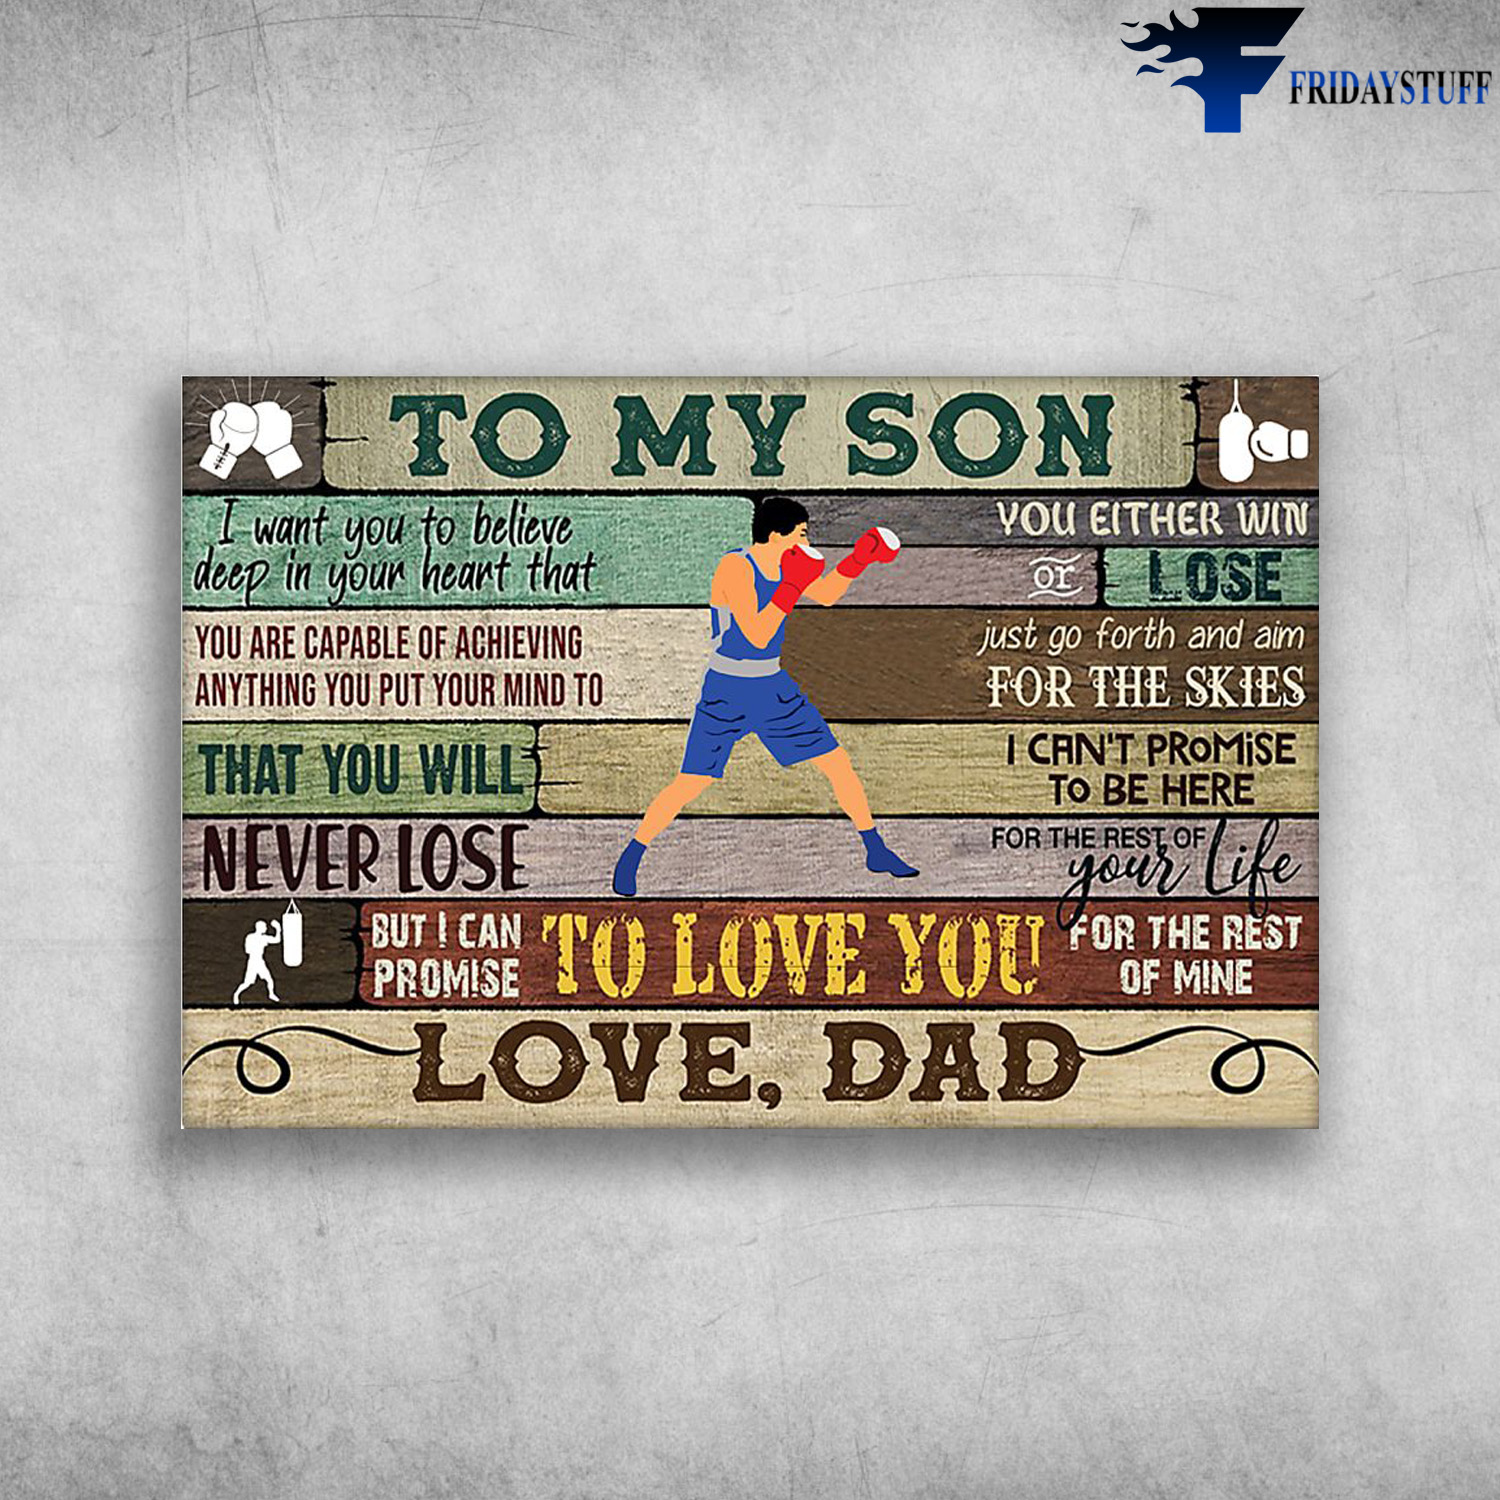 Boxing Man - To My Son I Want You To Believe Deep In our Heart